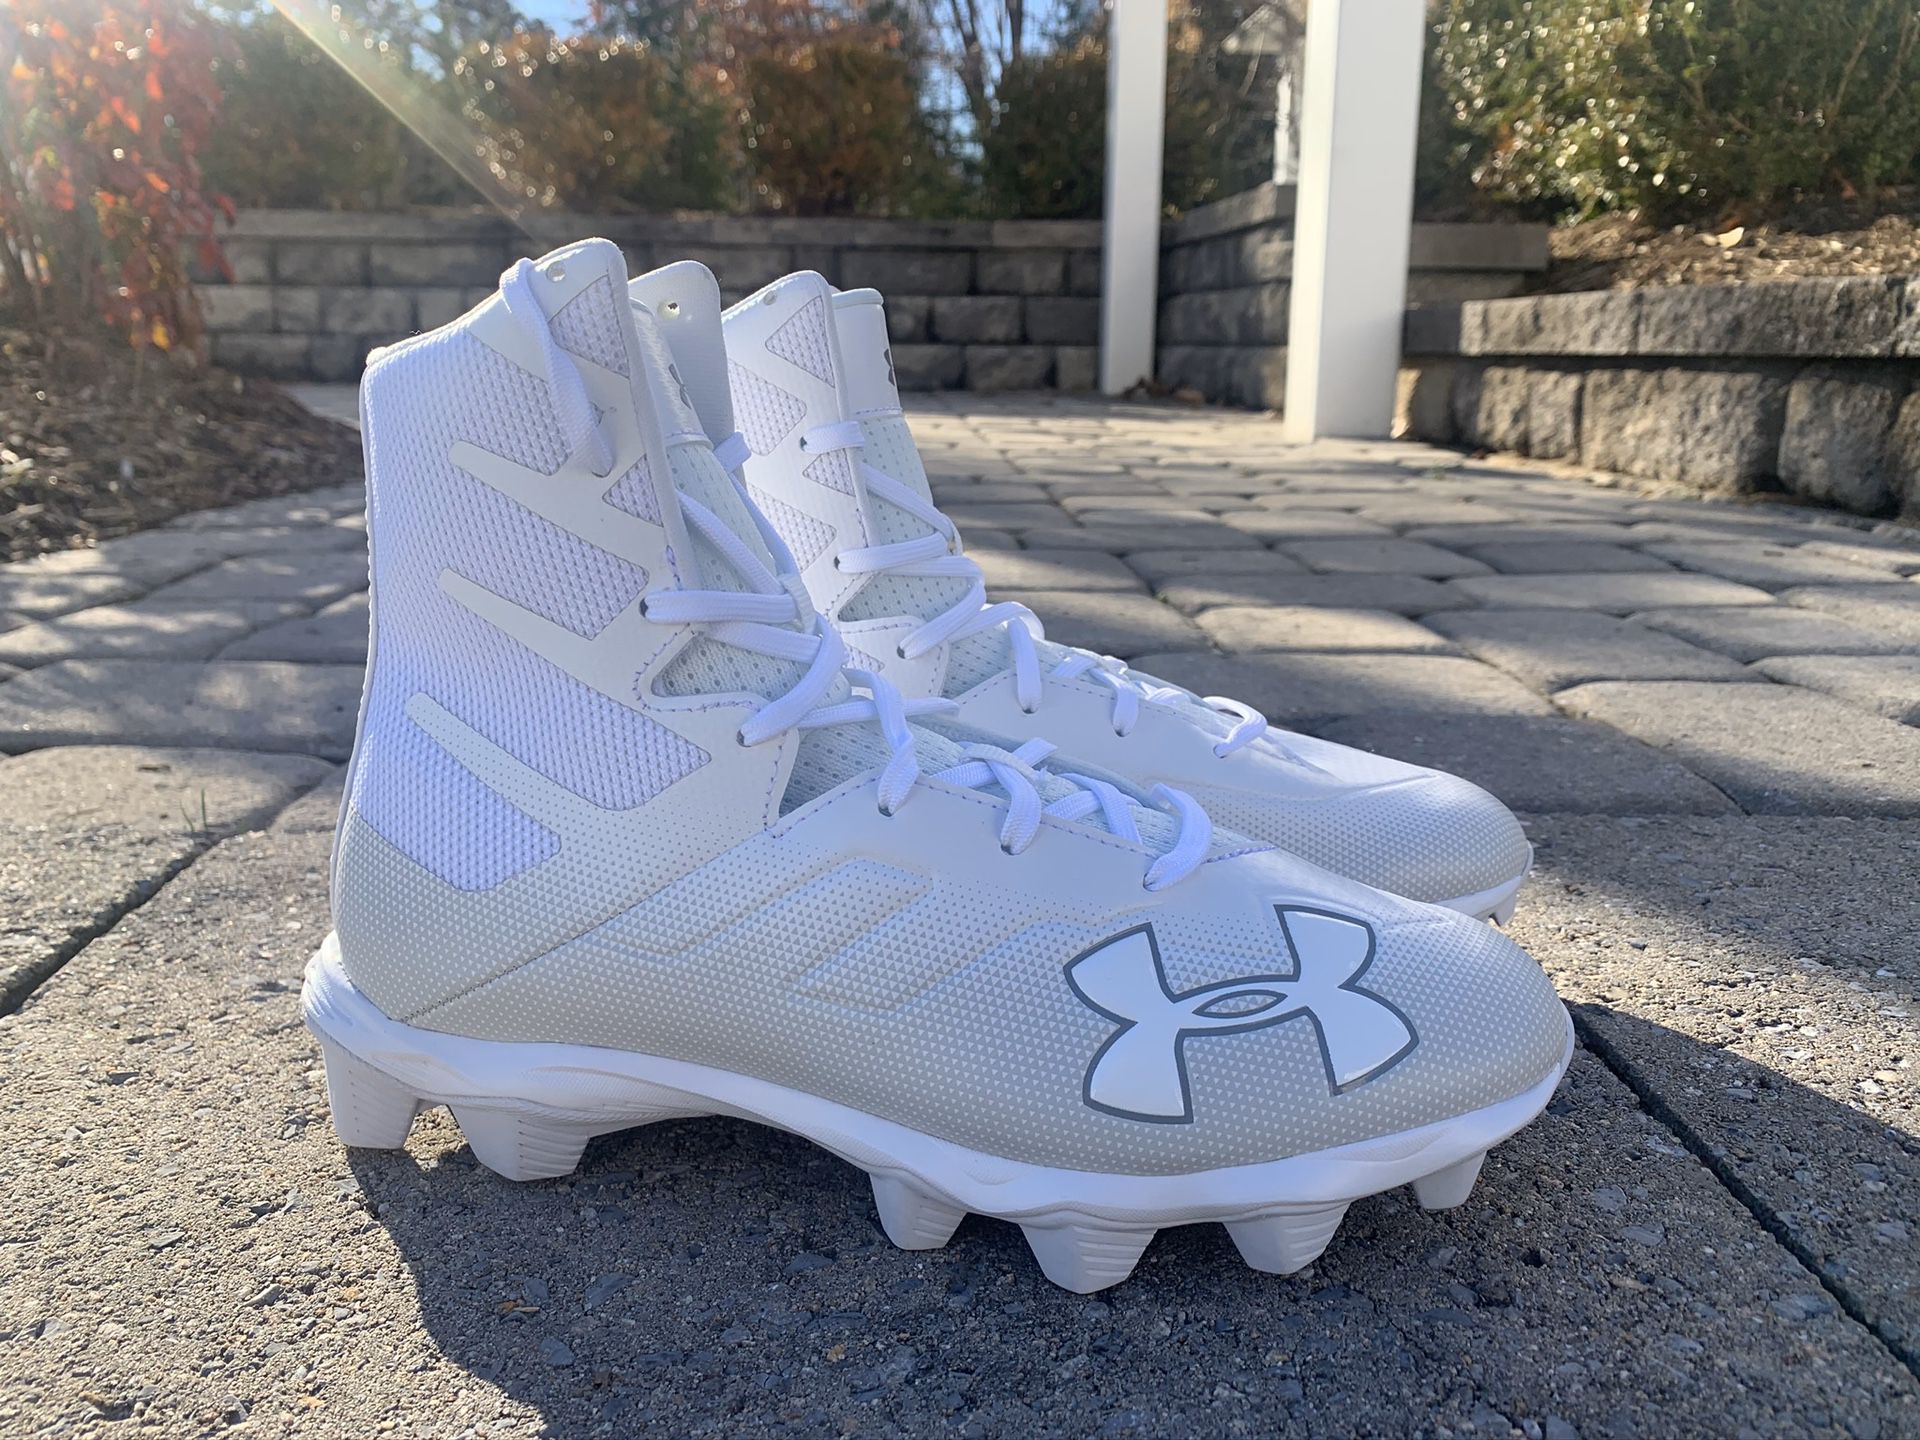 Lacrosse cleat size 6 youth